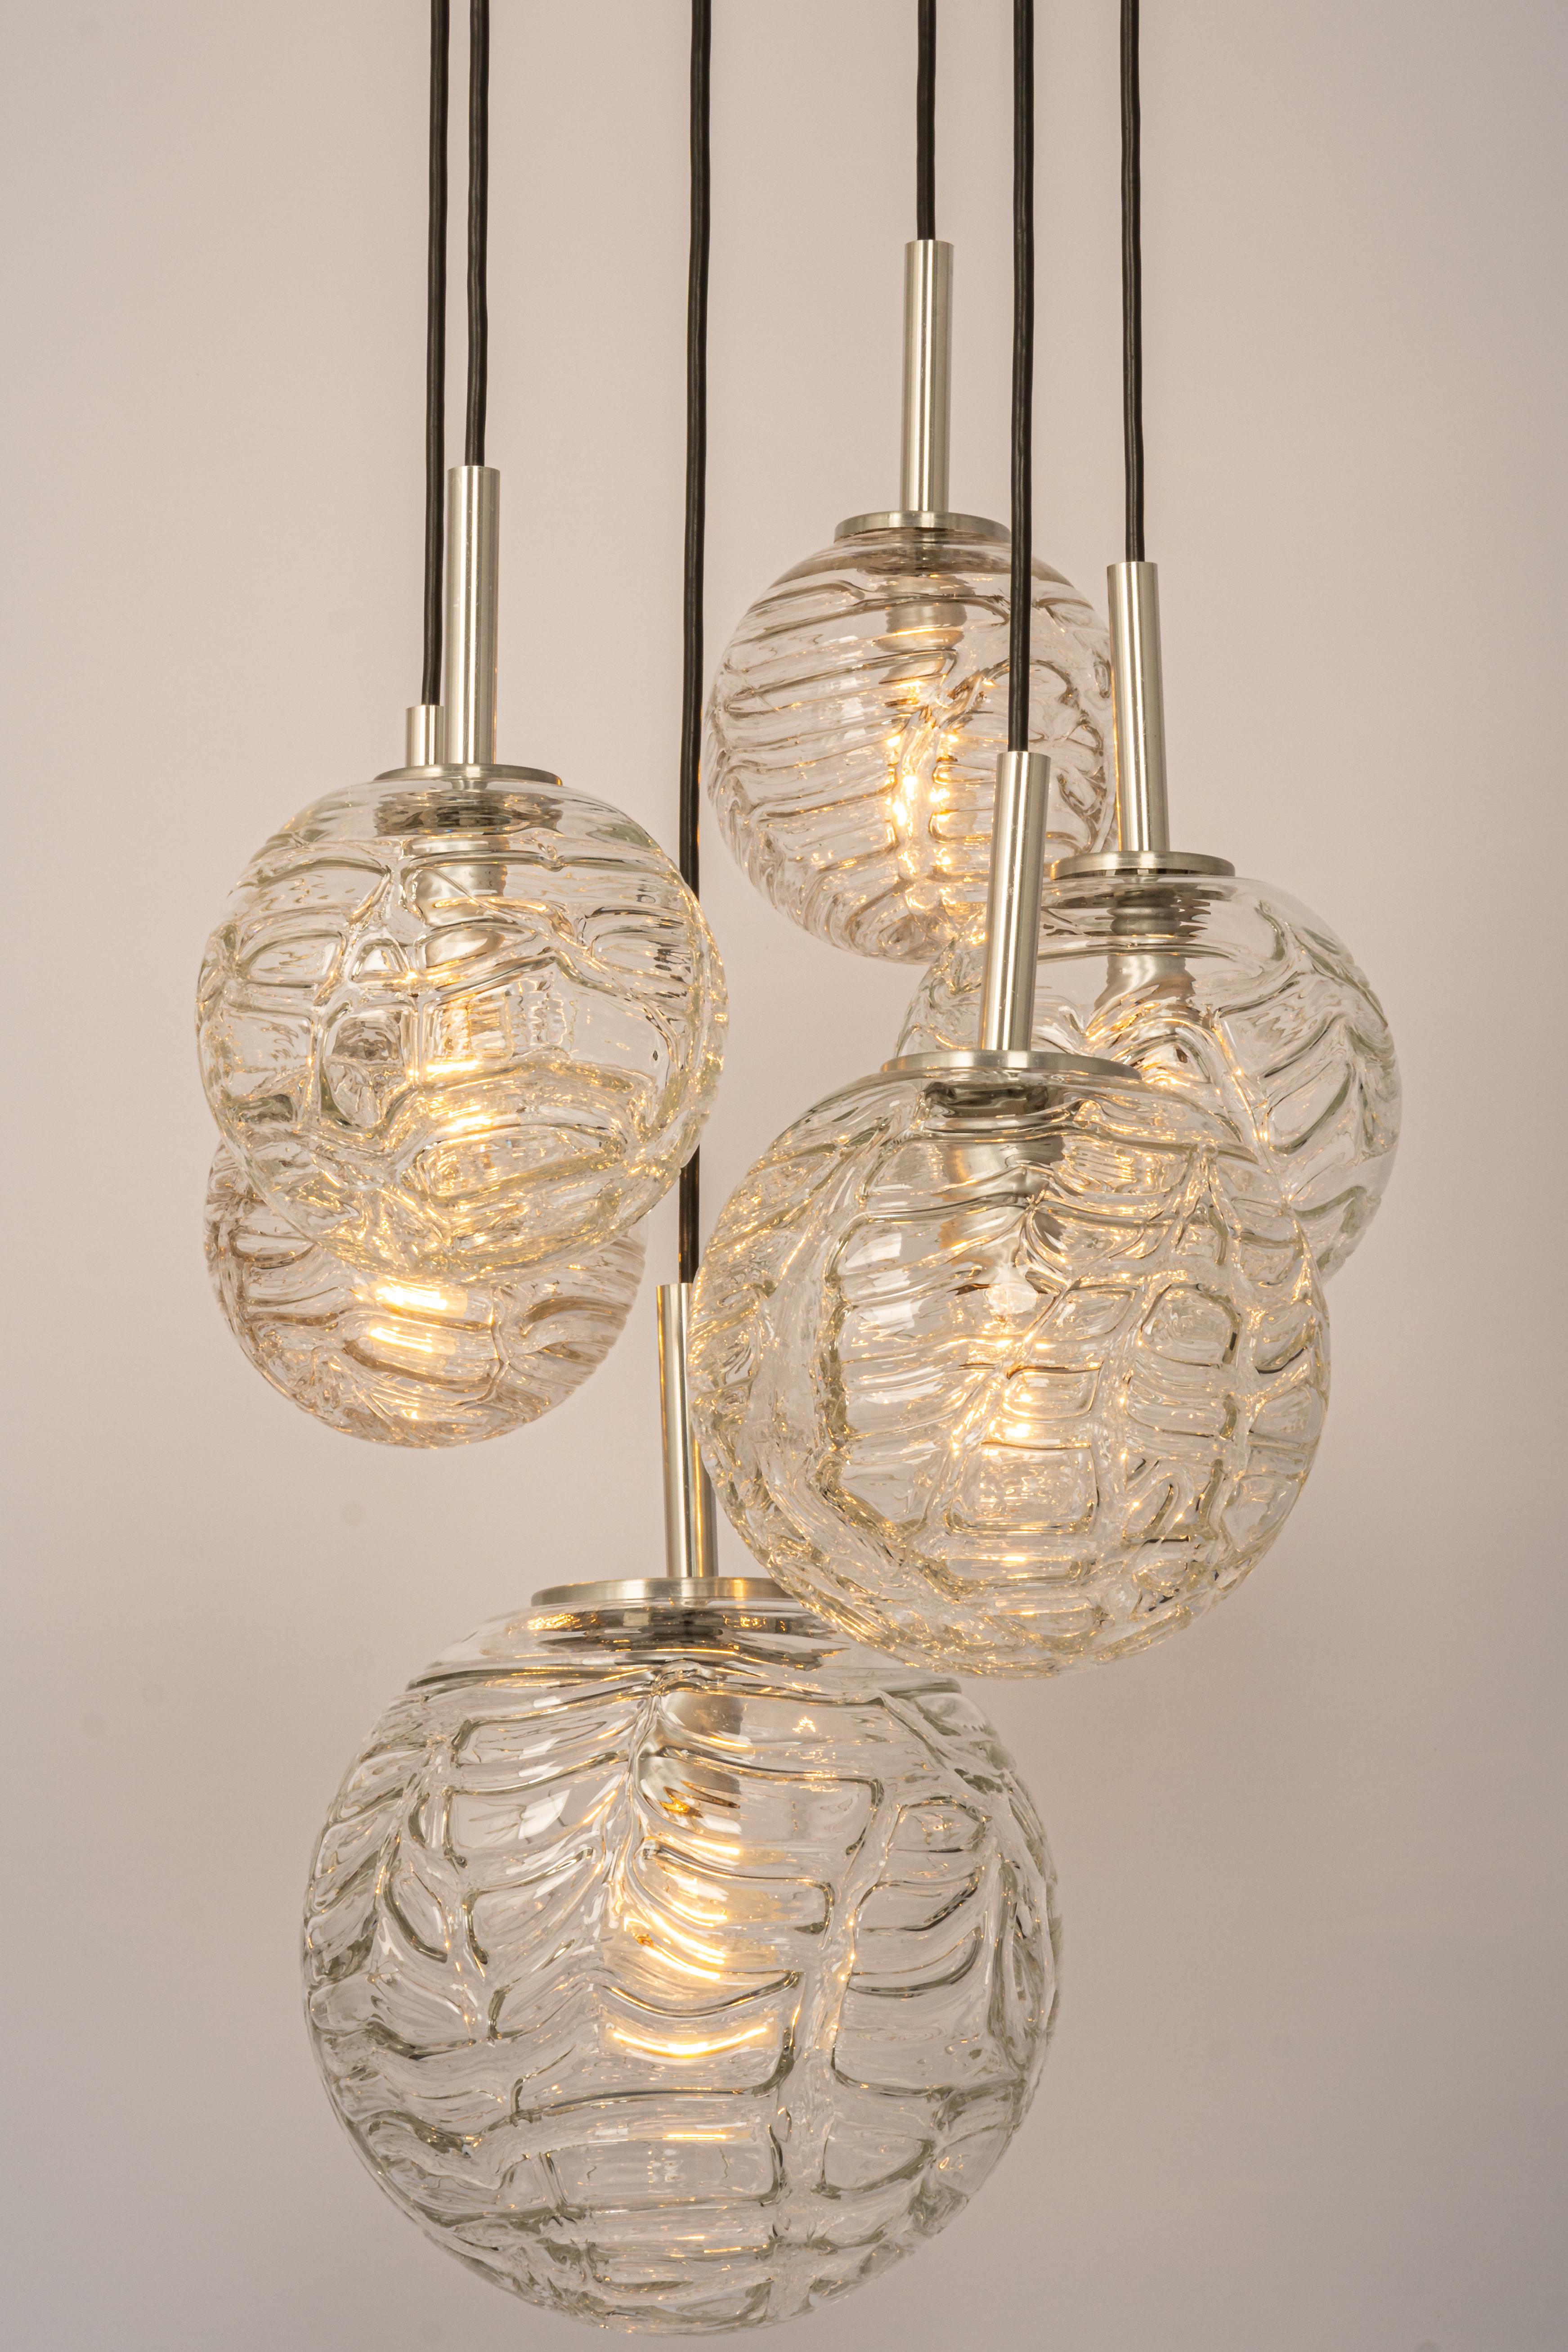 A special large cascading chandelier by Doria, manufactured in Germany, circa the 1970s with 6 Murano glasses.
Wonderful form and stunning light effect.
Sockets: 4 x E14 small bulb. (40 W max) and 2 X E27 Standard Bulbs ( up to 80 W each)
Light